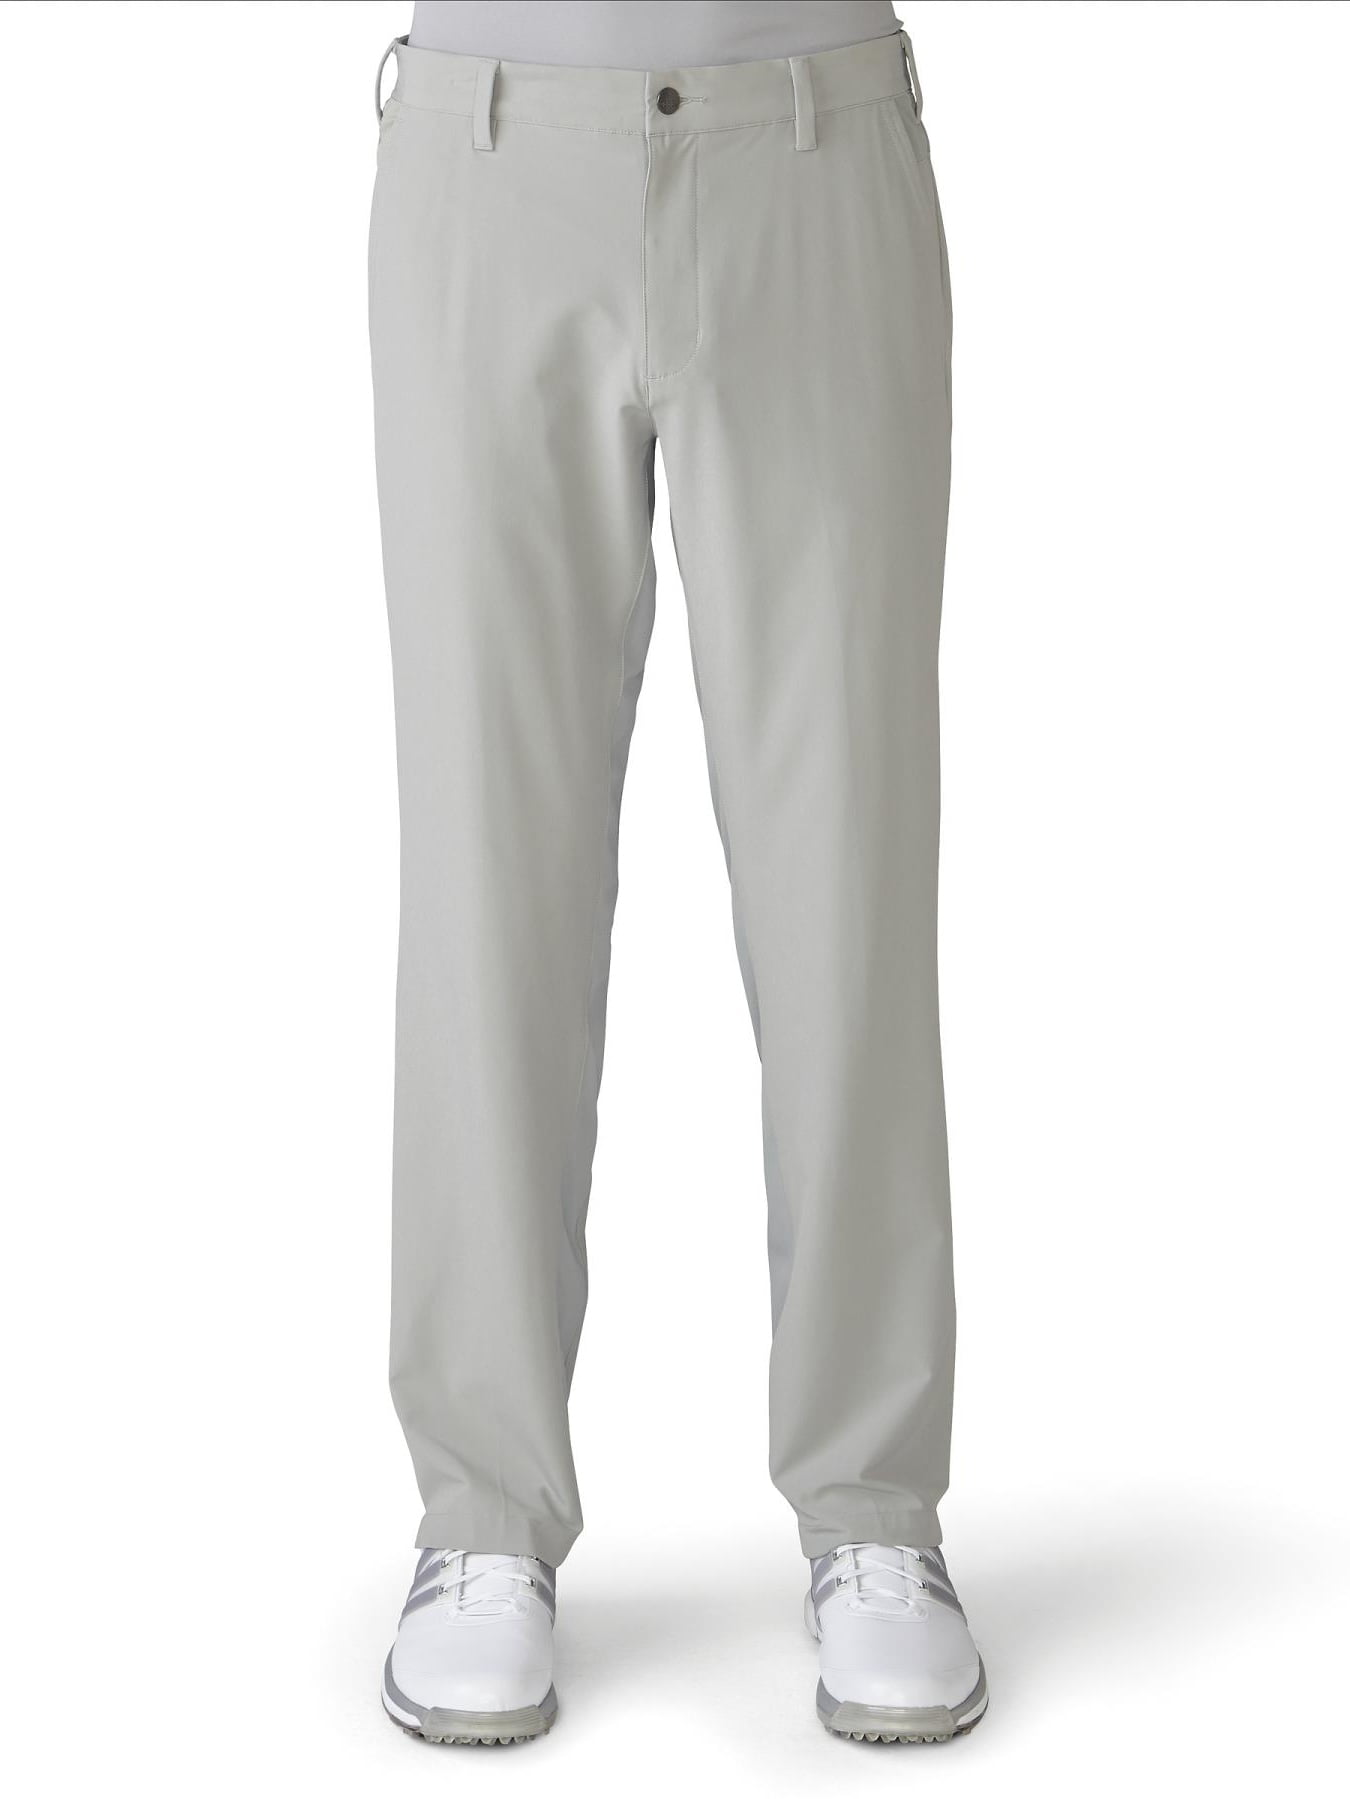 adidas climacool women's ultimate classic pant